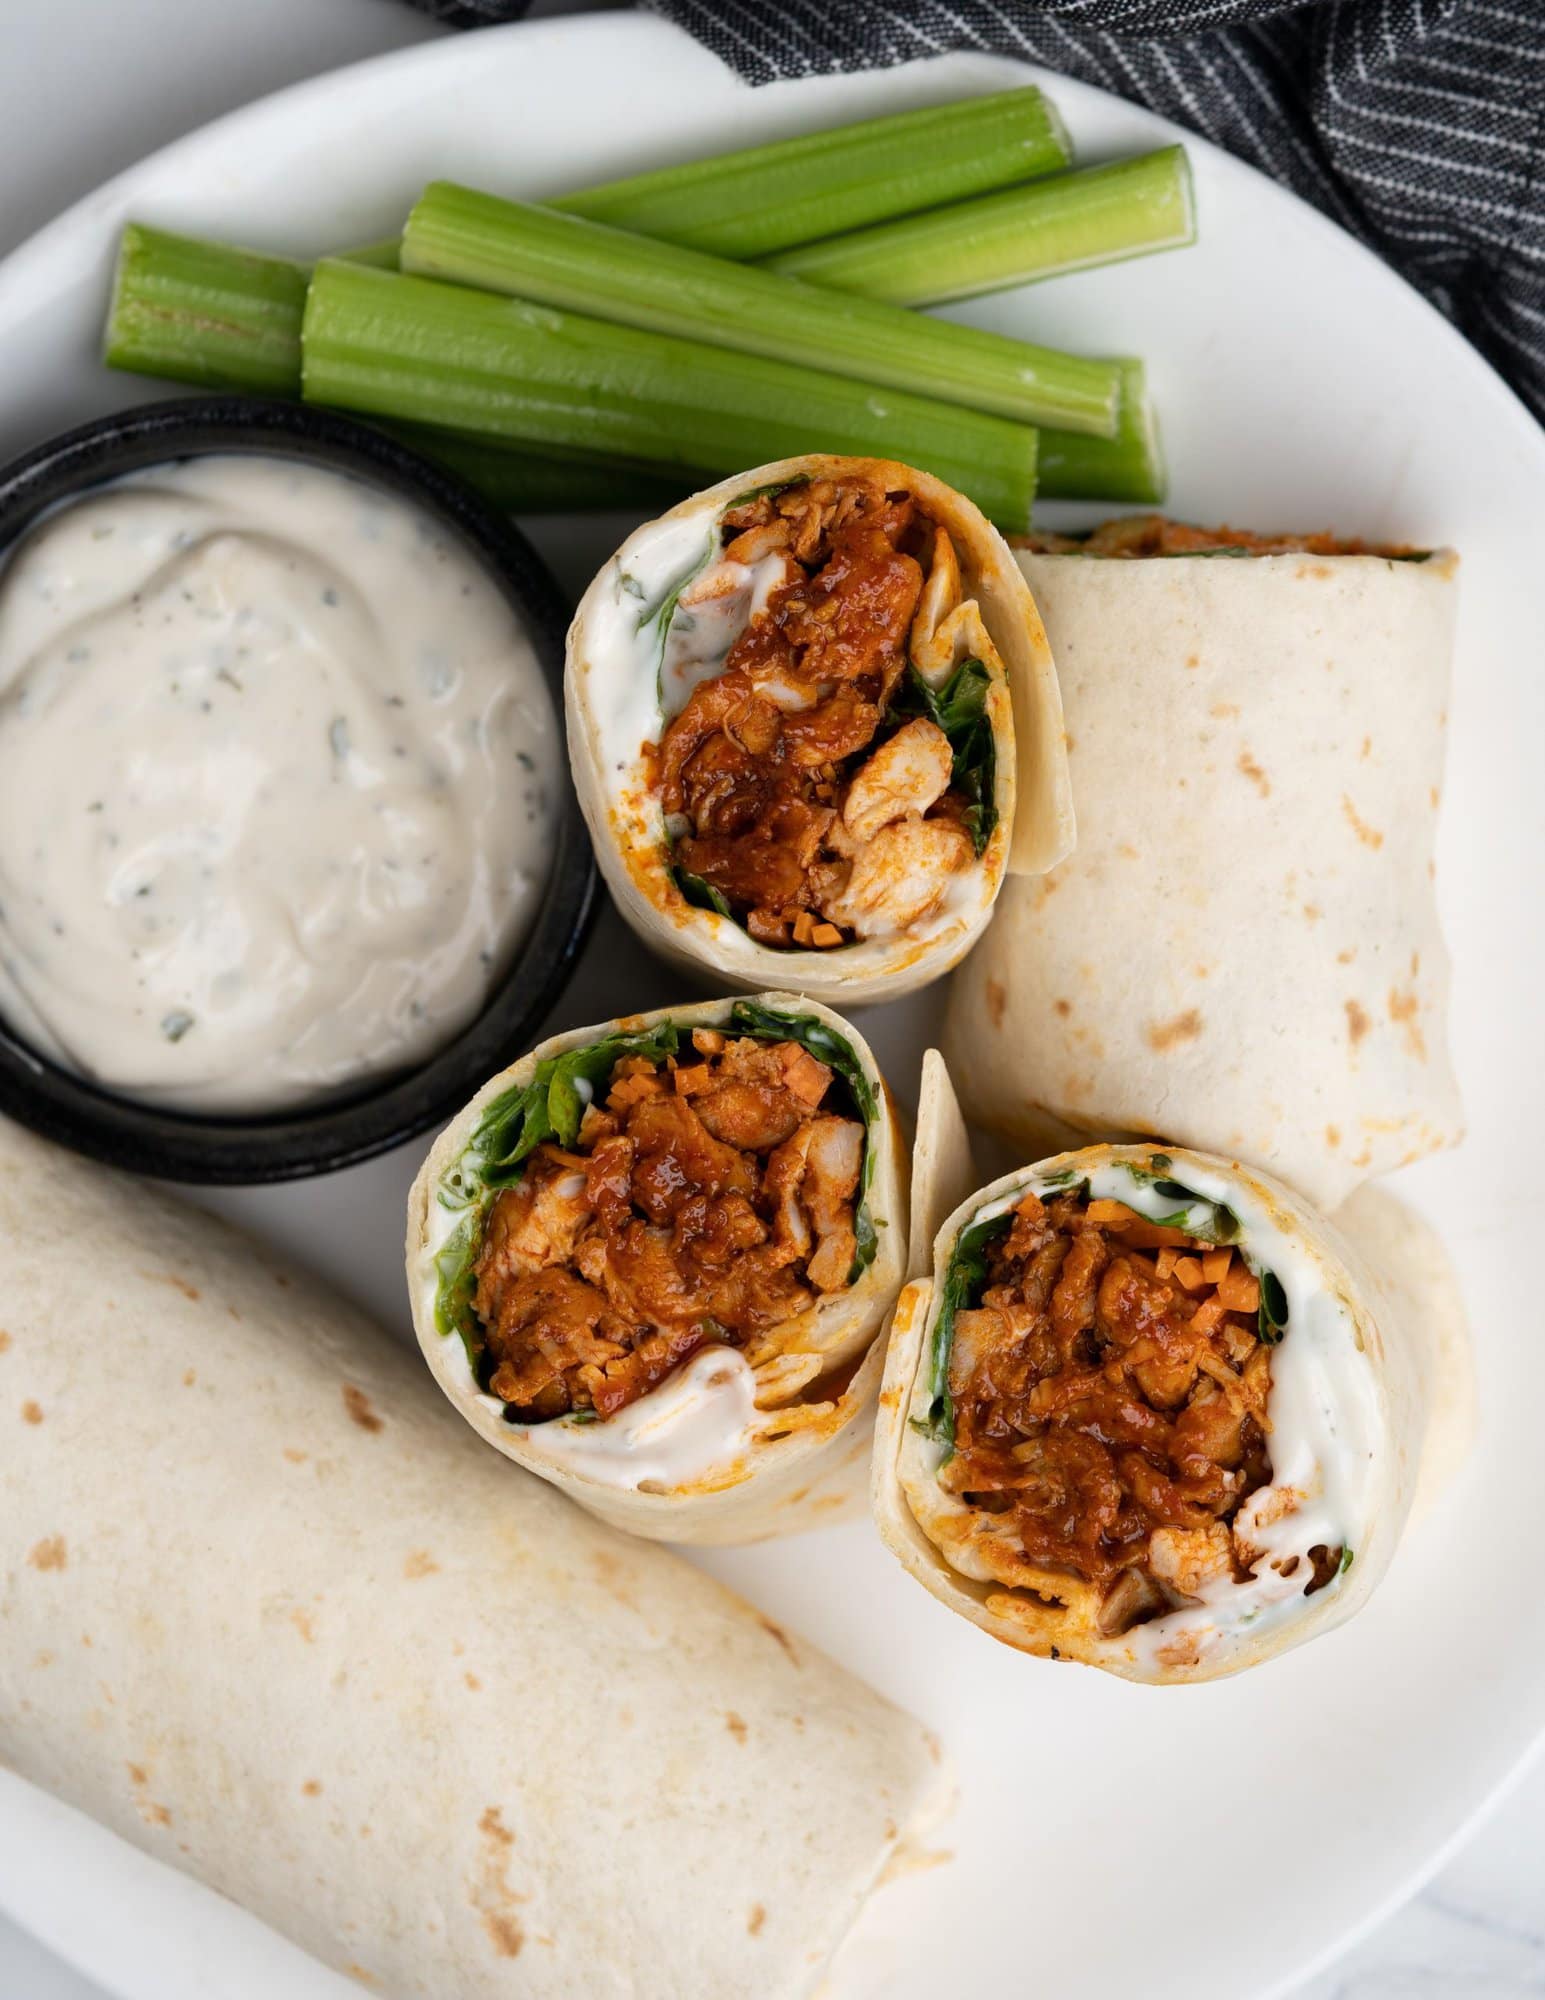 Tortilla wraps filled with juicy buffalo chicken, carrots, salad greens and then topped with creamy ranch dressing.